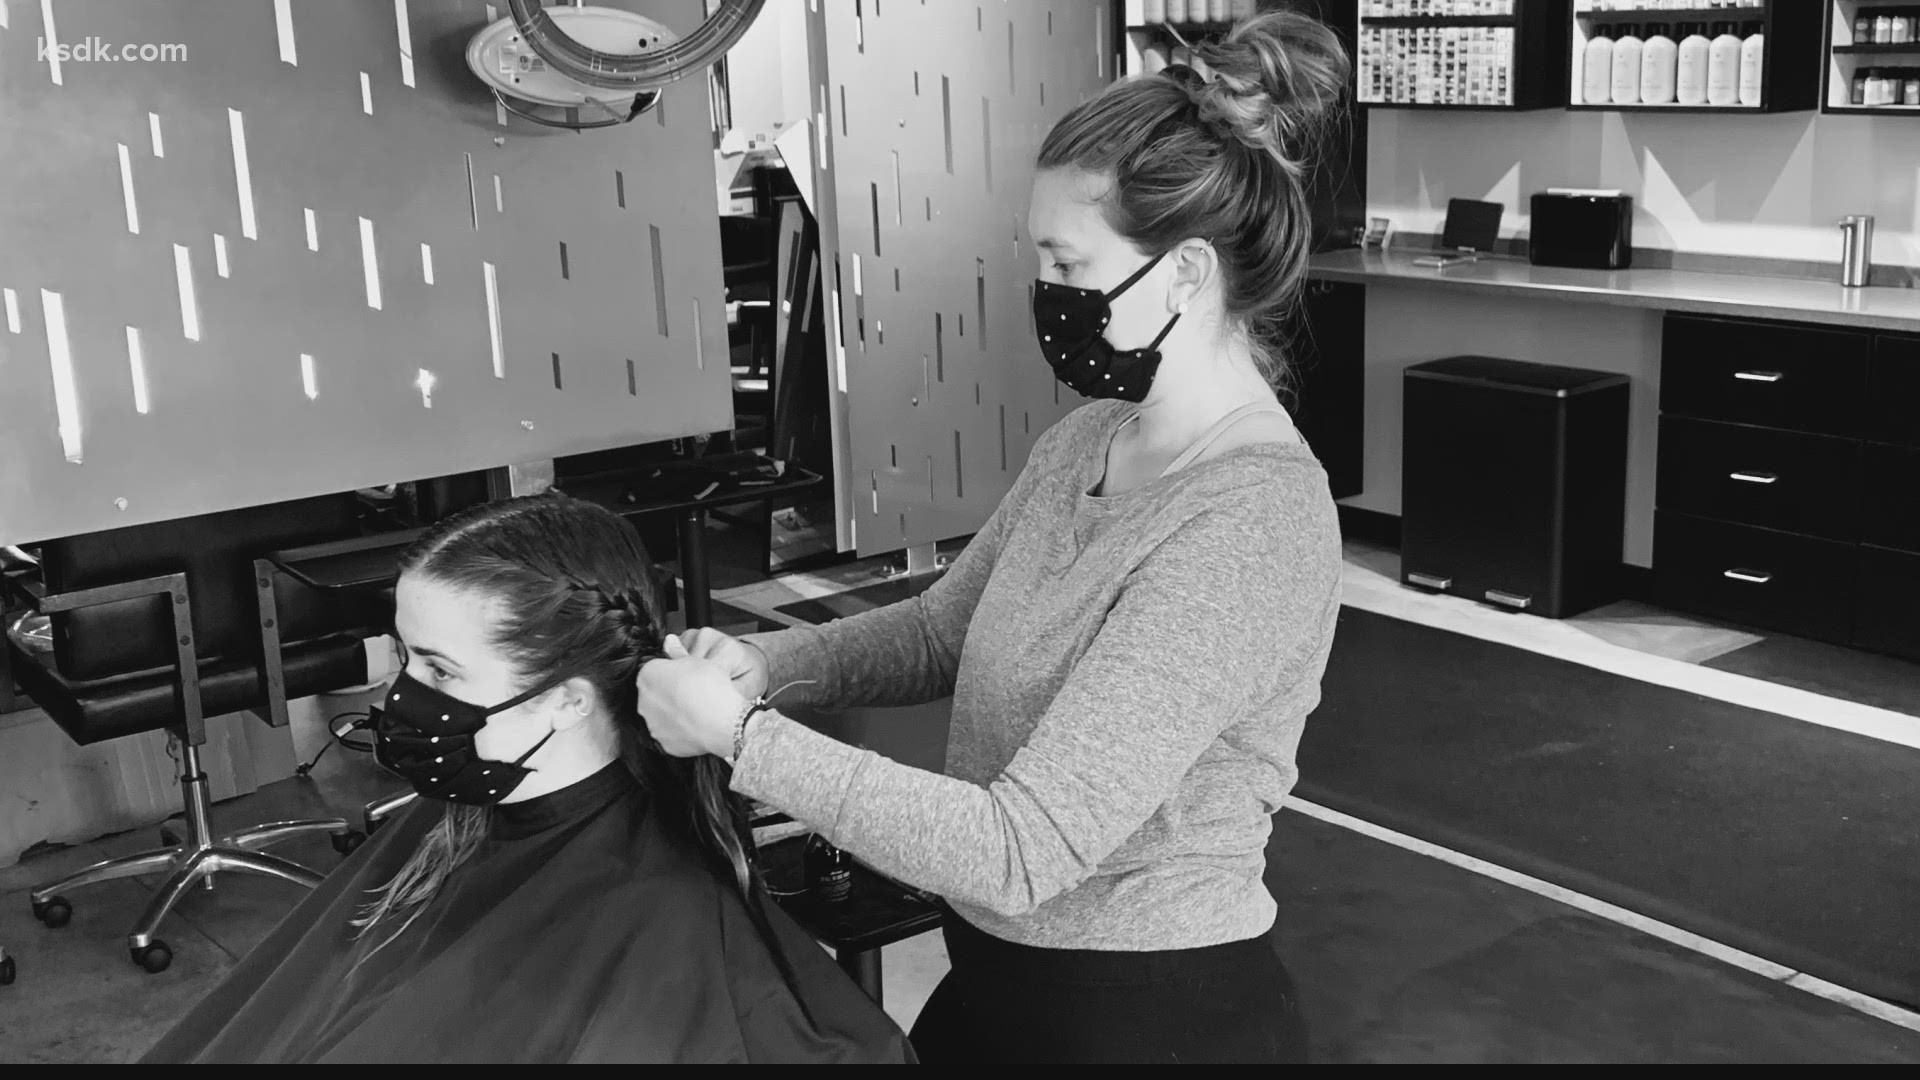 St. Louis hair salons reopen after coronavirus concerns | 0